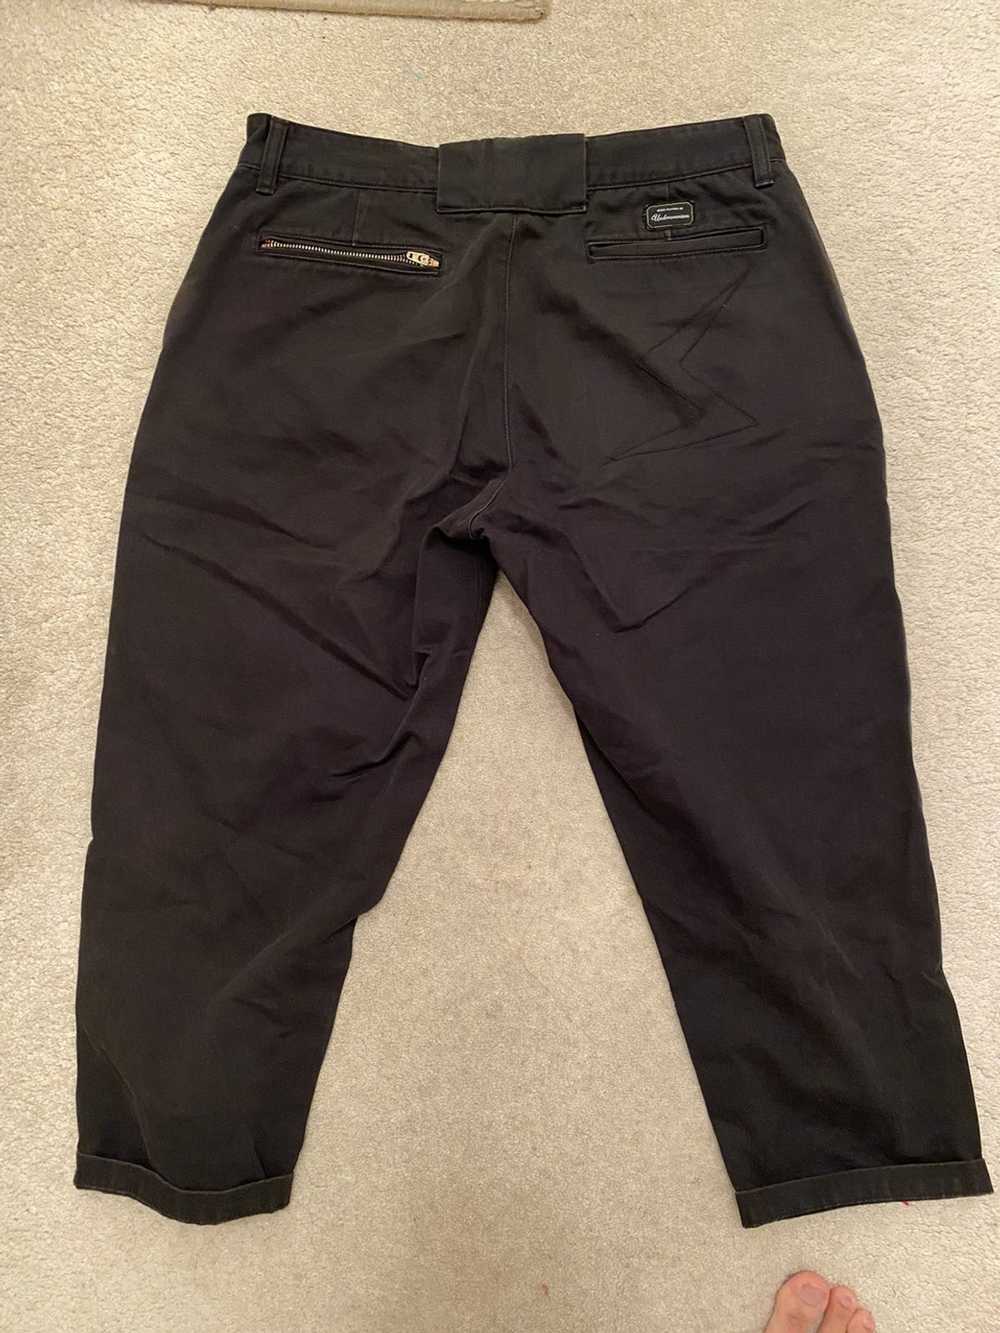 Undercover Neo Boy Cropped DMG pants - image 4